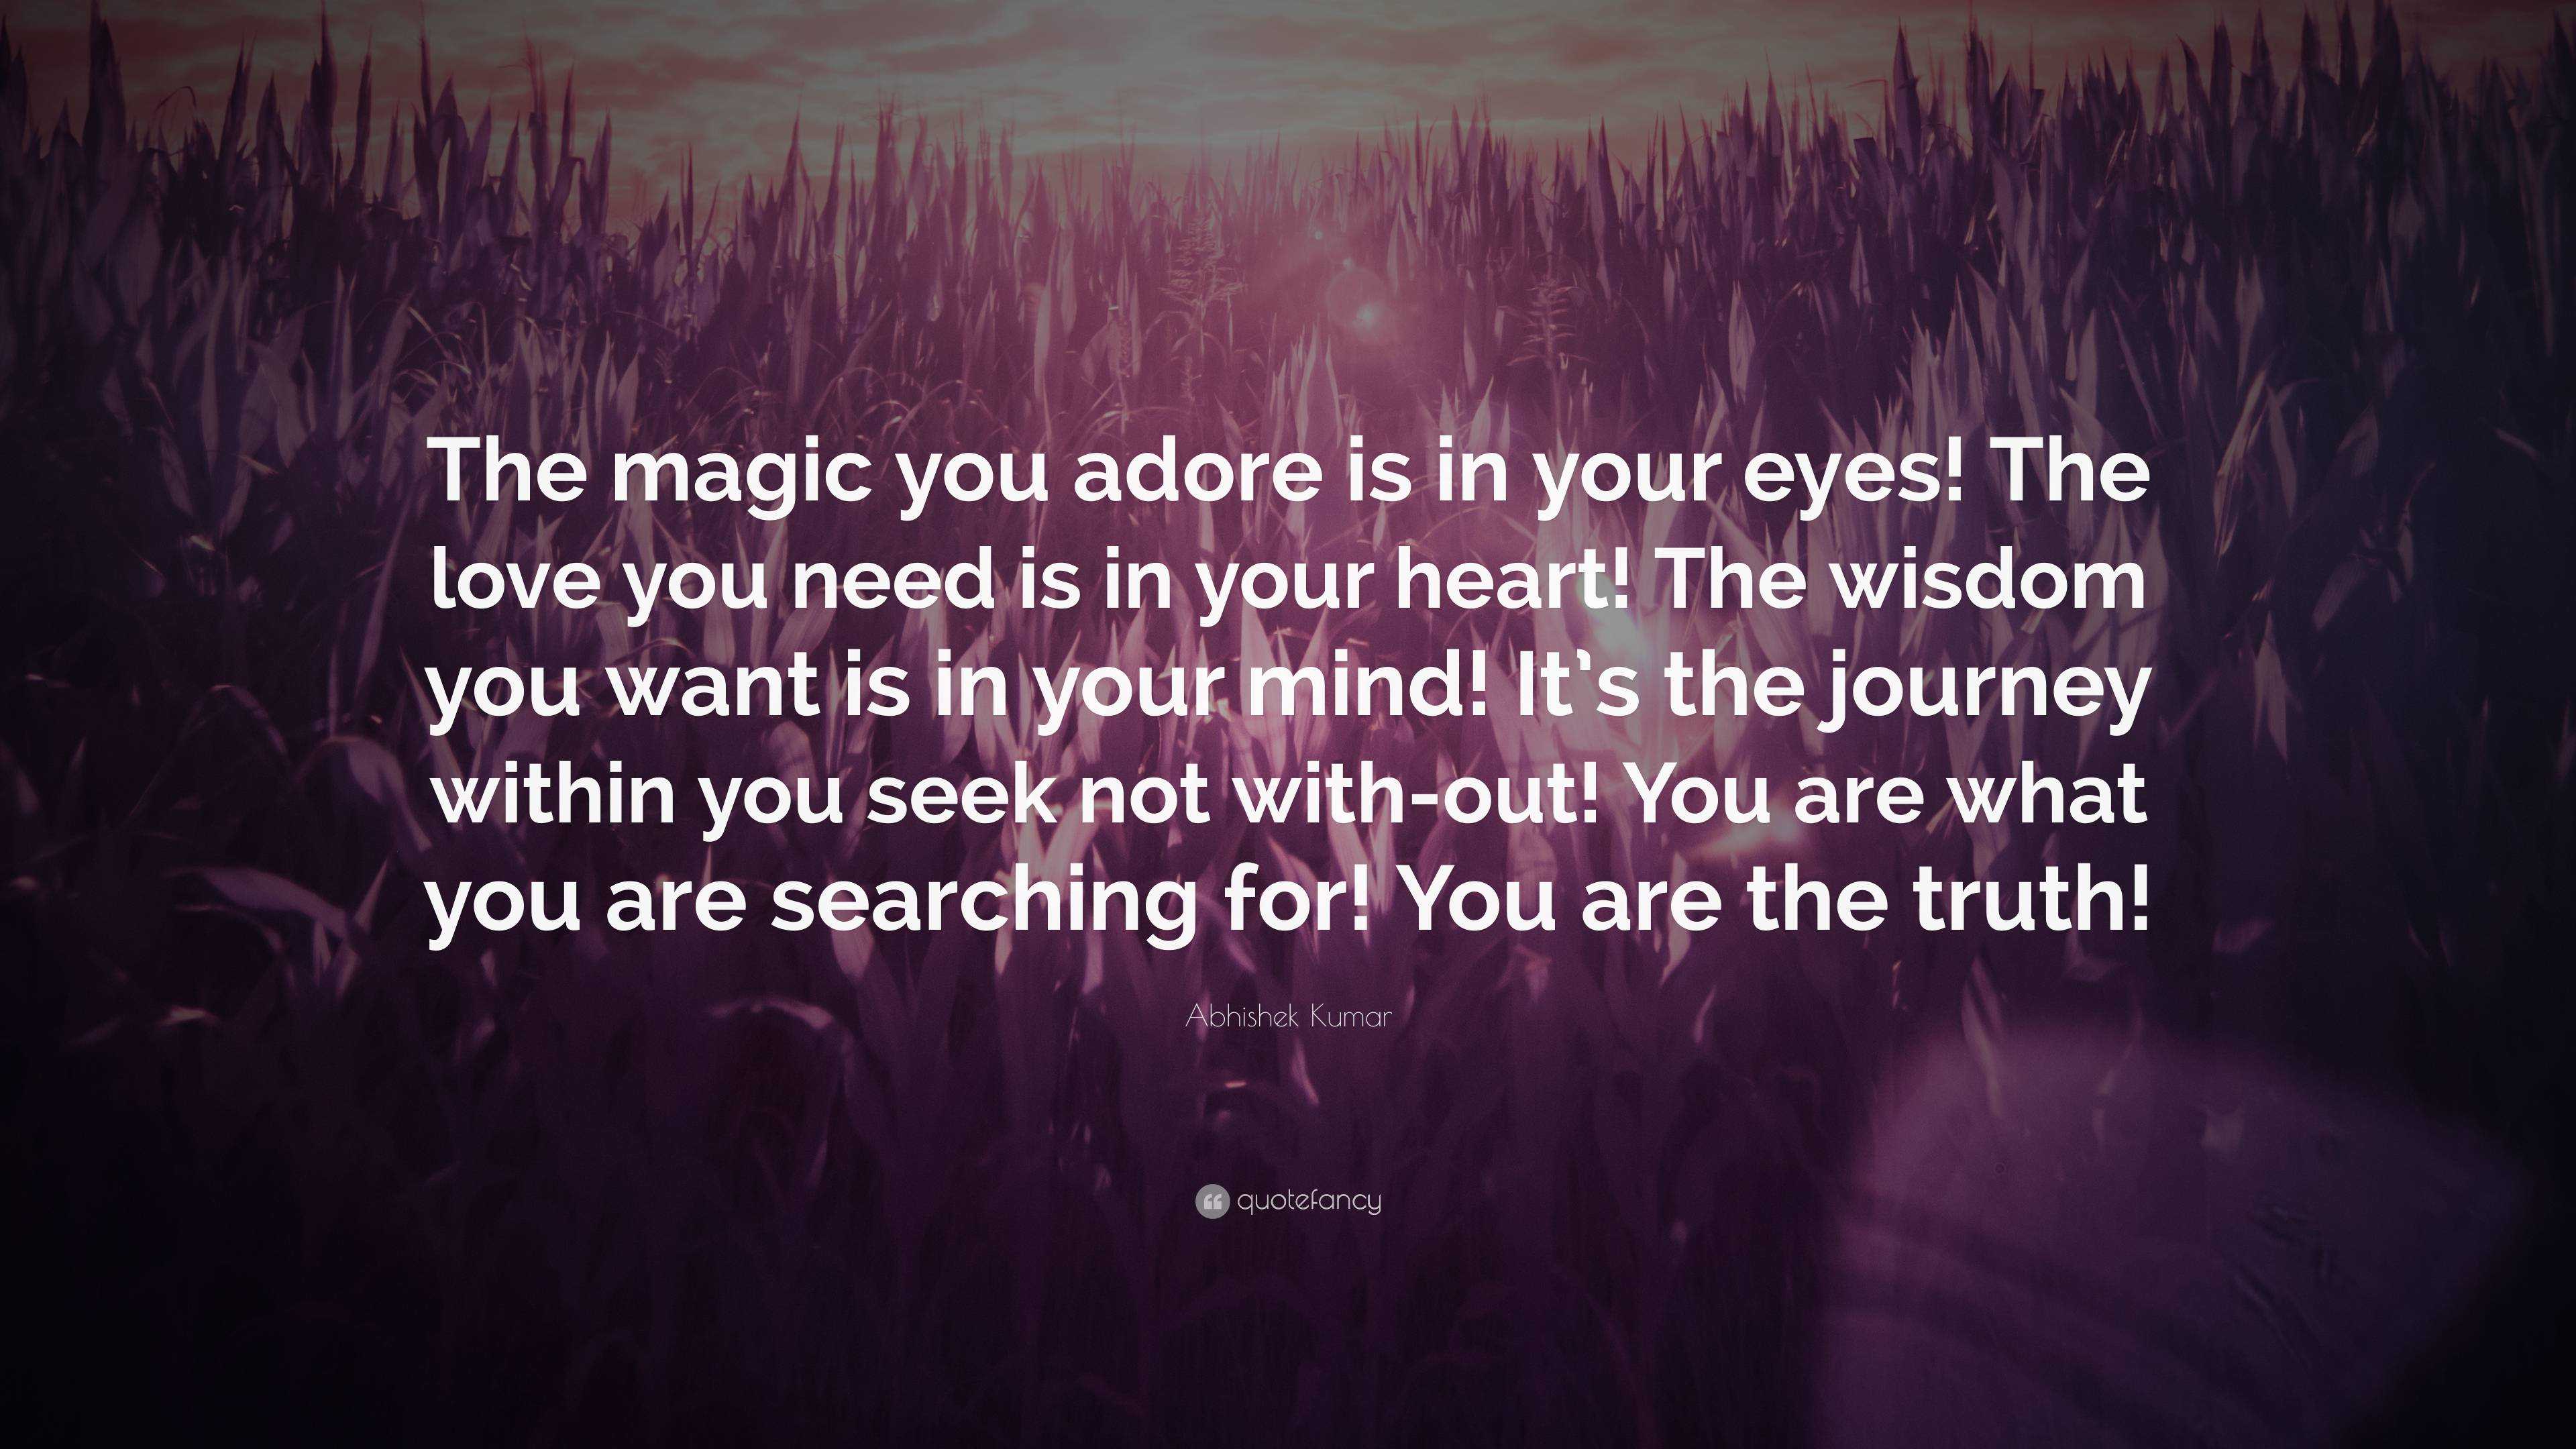 Abhishek Kumar Quote: “The magic you adore is in your eyes! The love you  need is in your heart! The wisdom you want is in your mind! It's the j...”